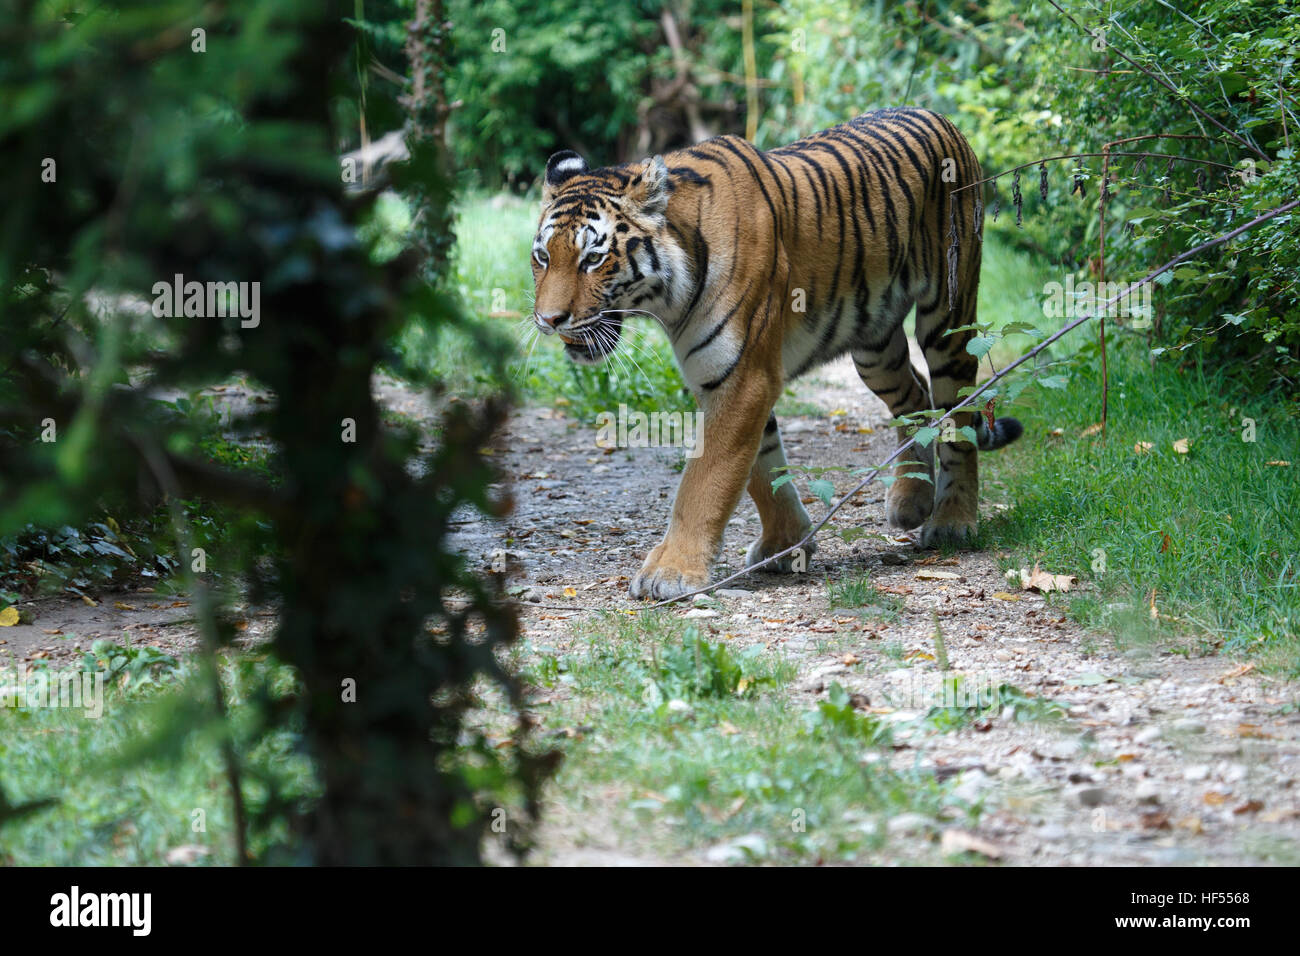 Siberian tiger or Amur tiger, Panthera tigris altaica, walking along a path in the forest. Stock Photo